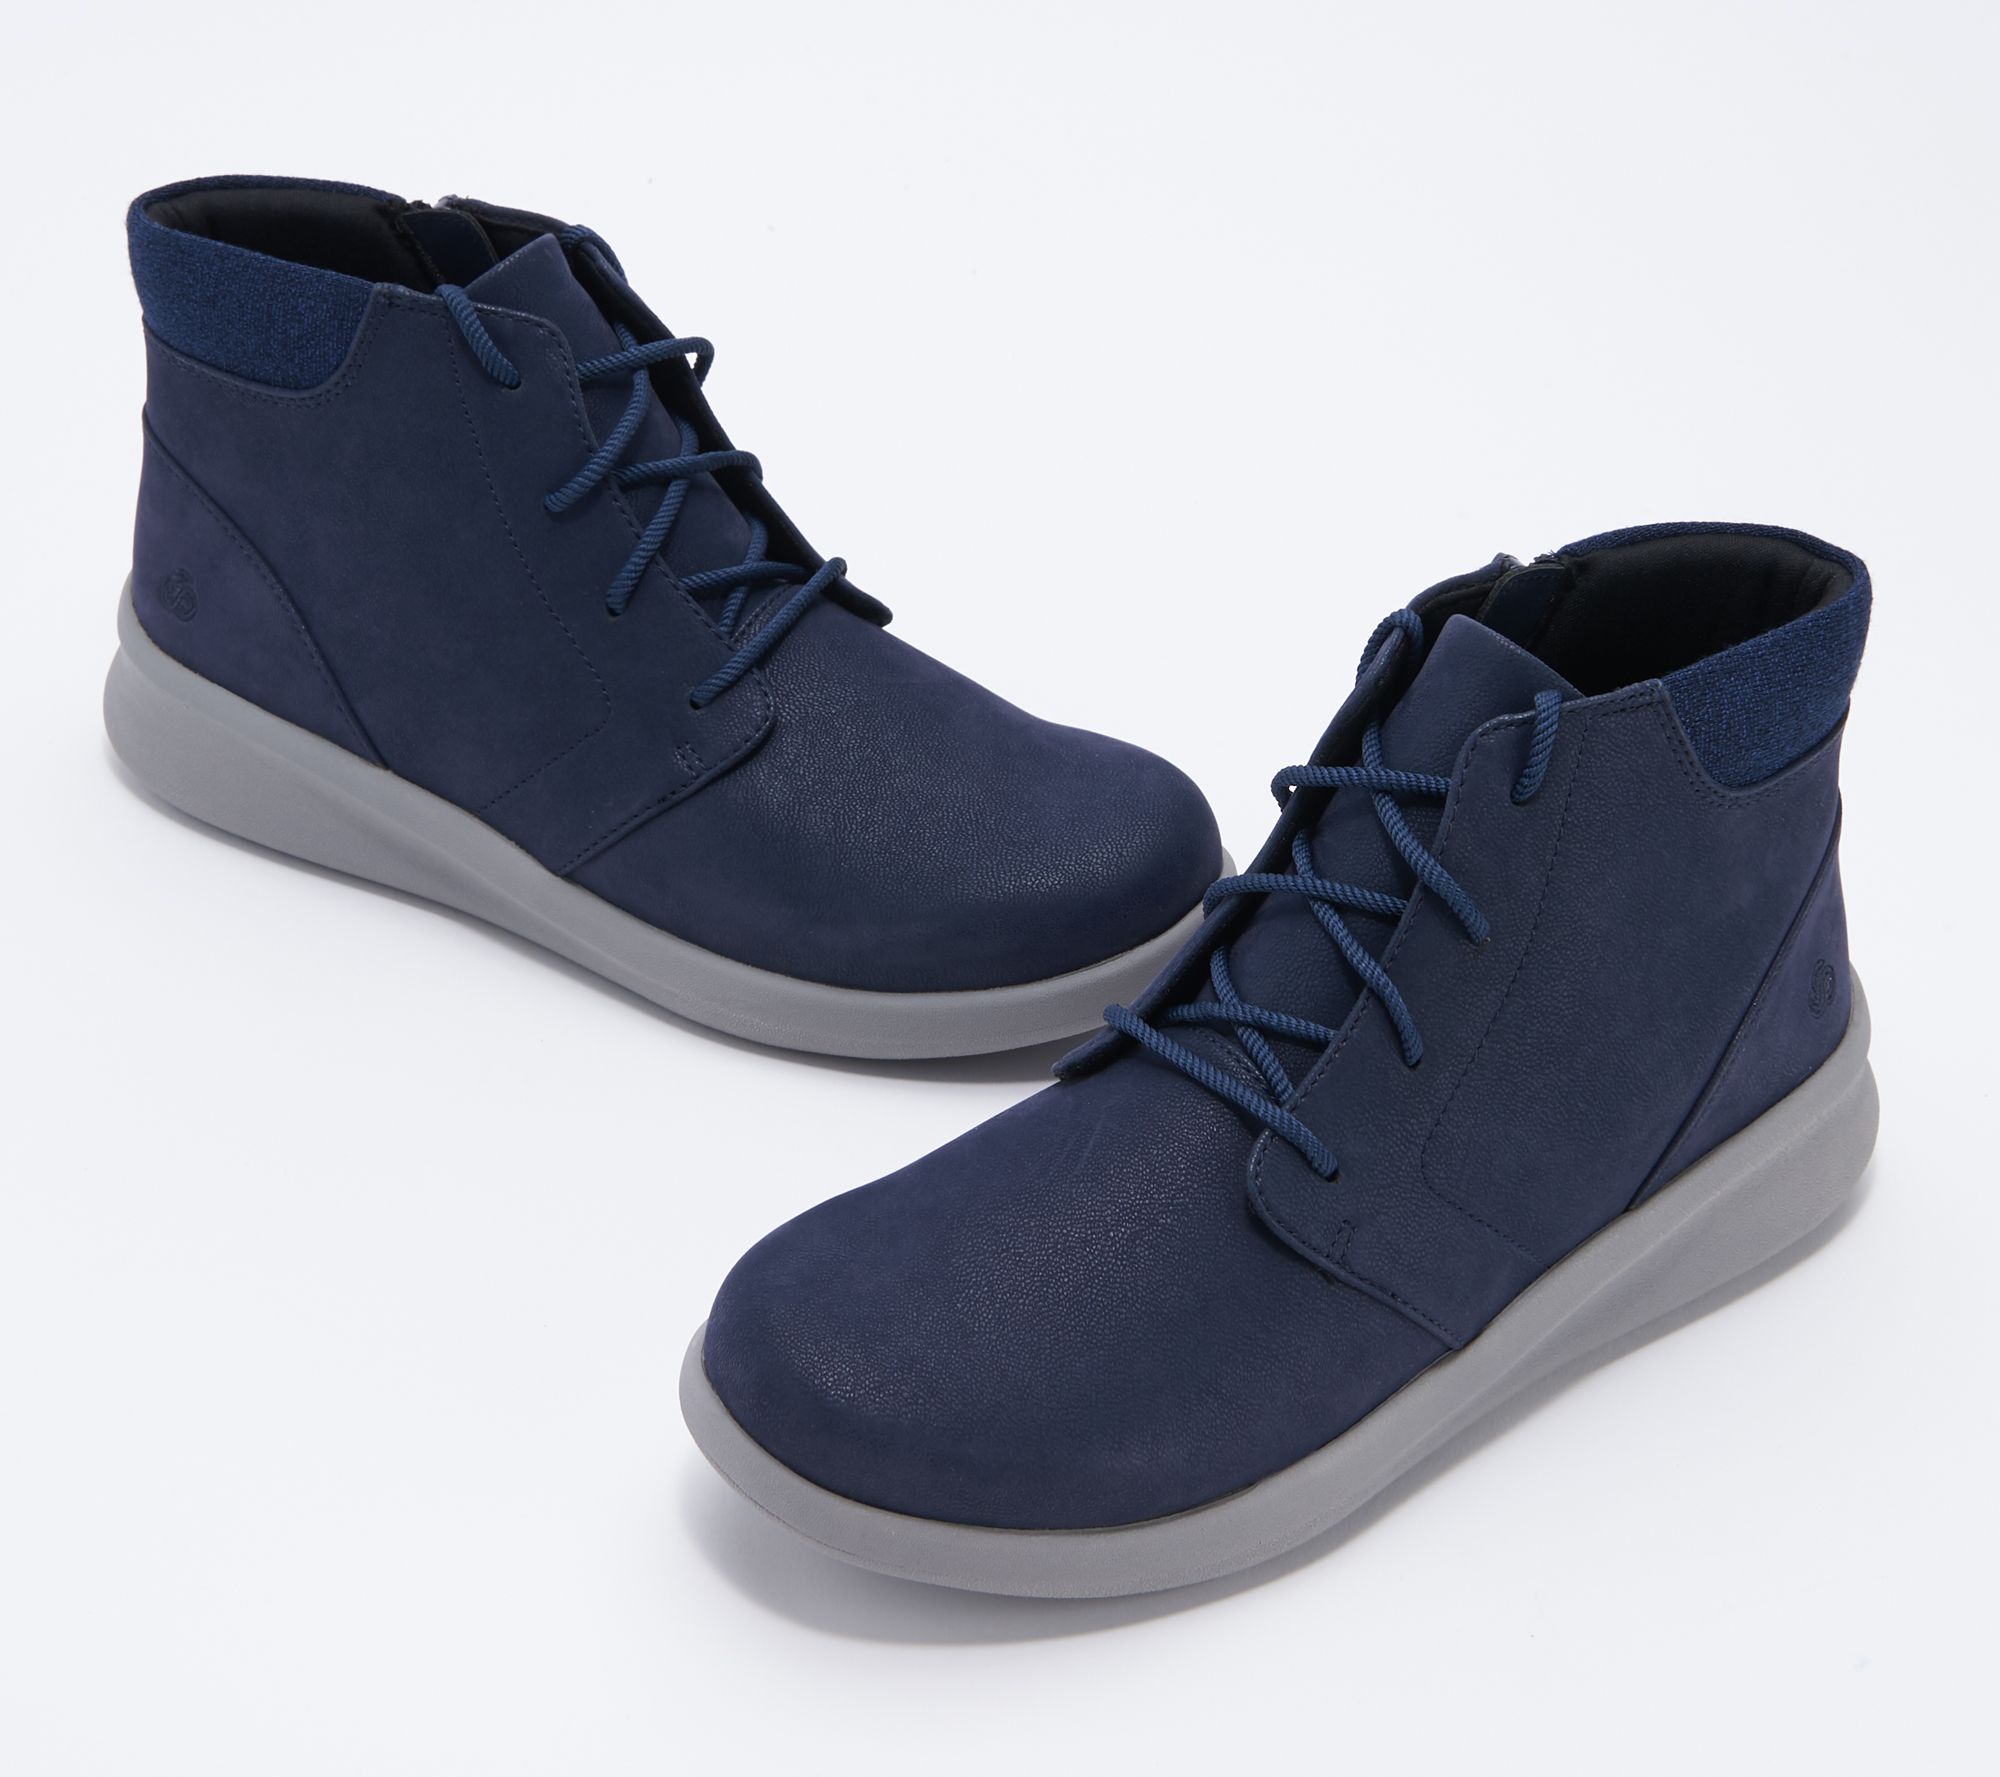 qvc clarks cloudsteppers